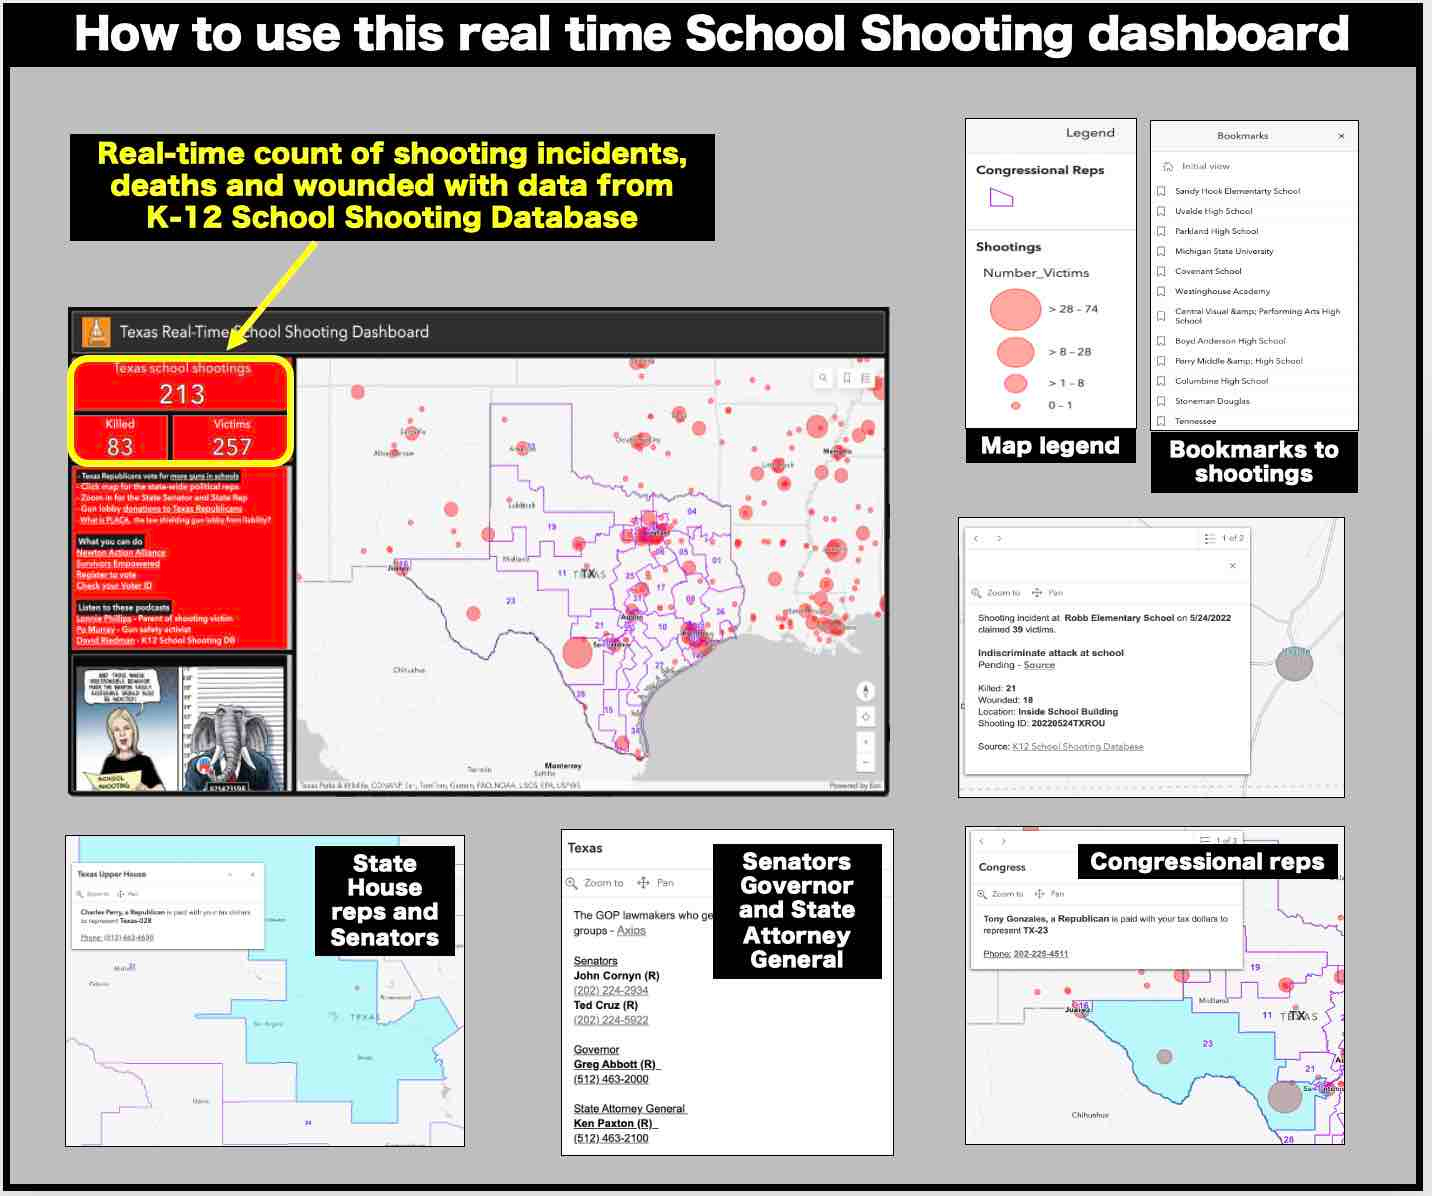 How to use a real tiem dashboard of school mass shootings